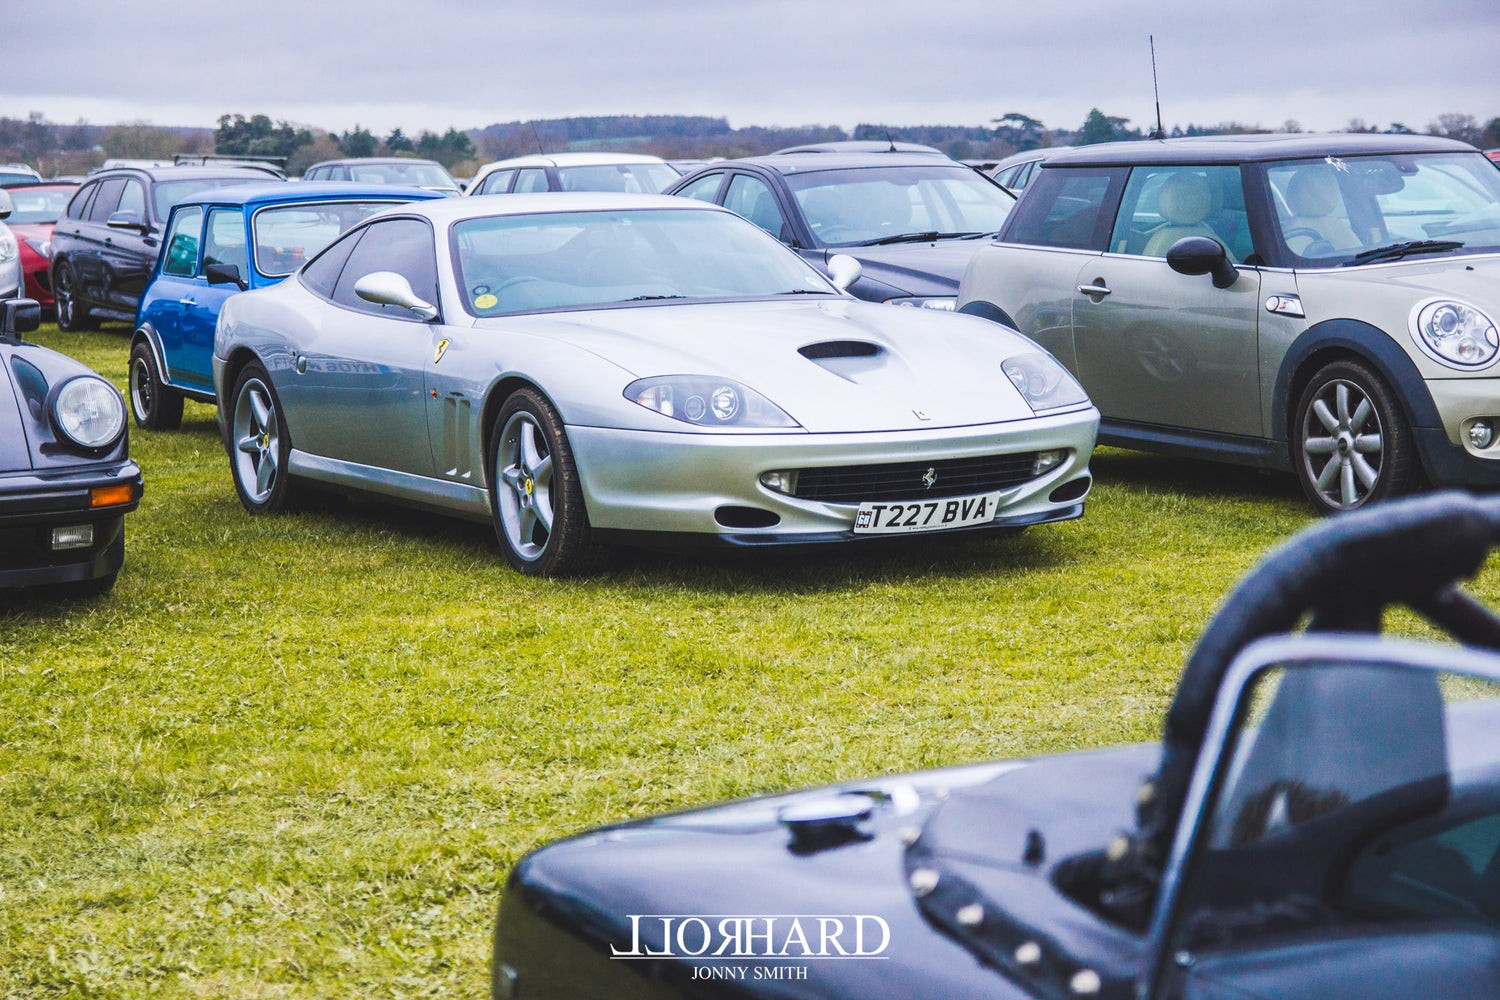 Goodwood - One Expensive Car Park.